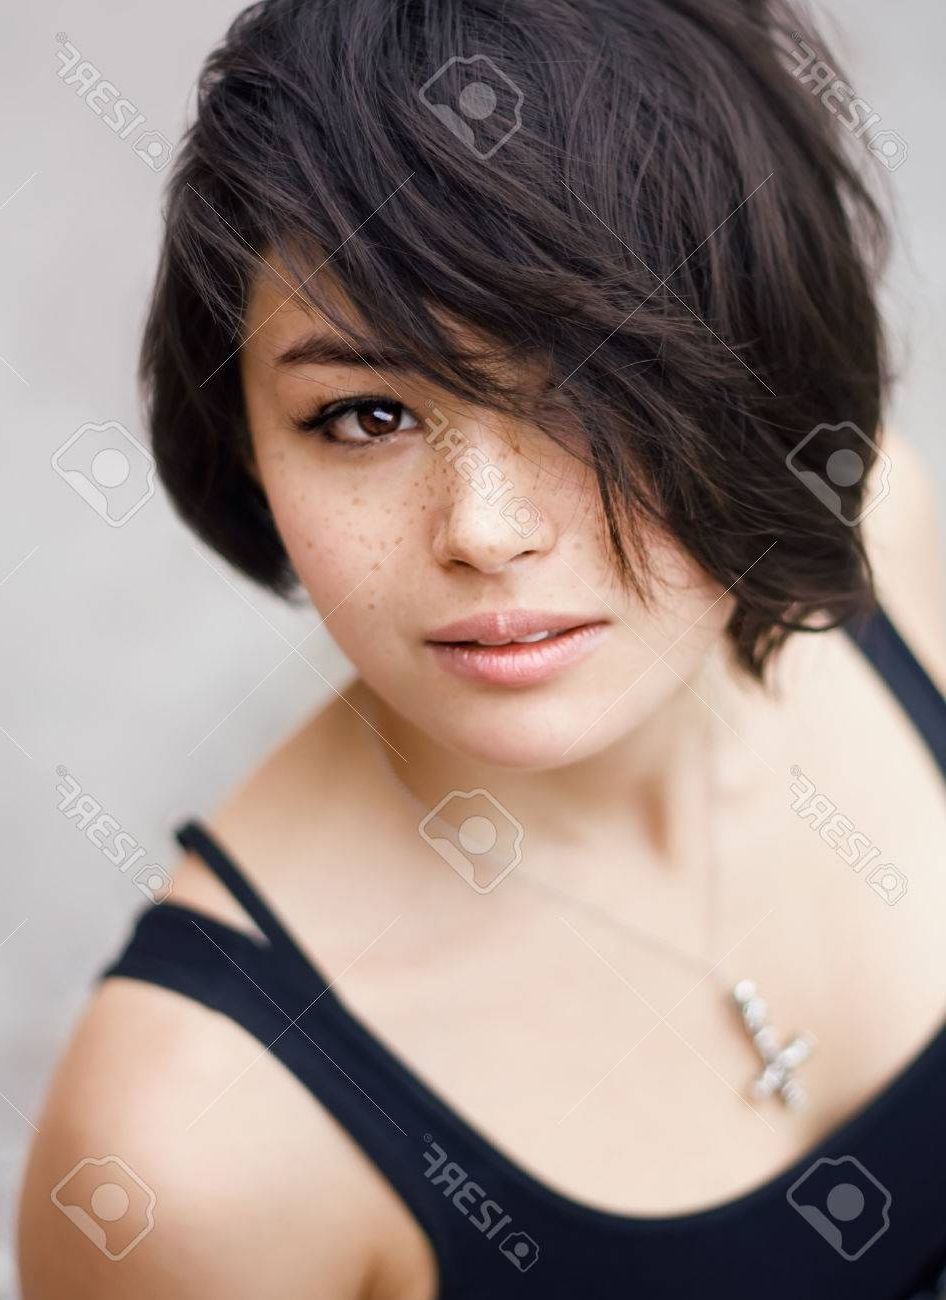 Pixie Haircut Images & Stock Pictures (View 12 of 15)